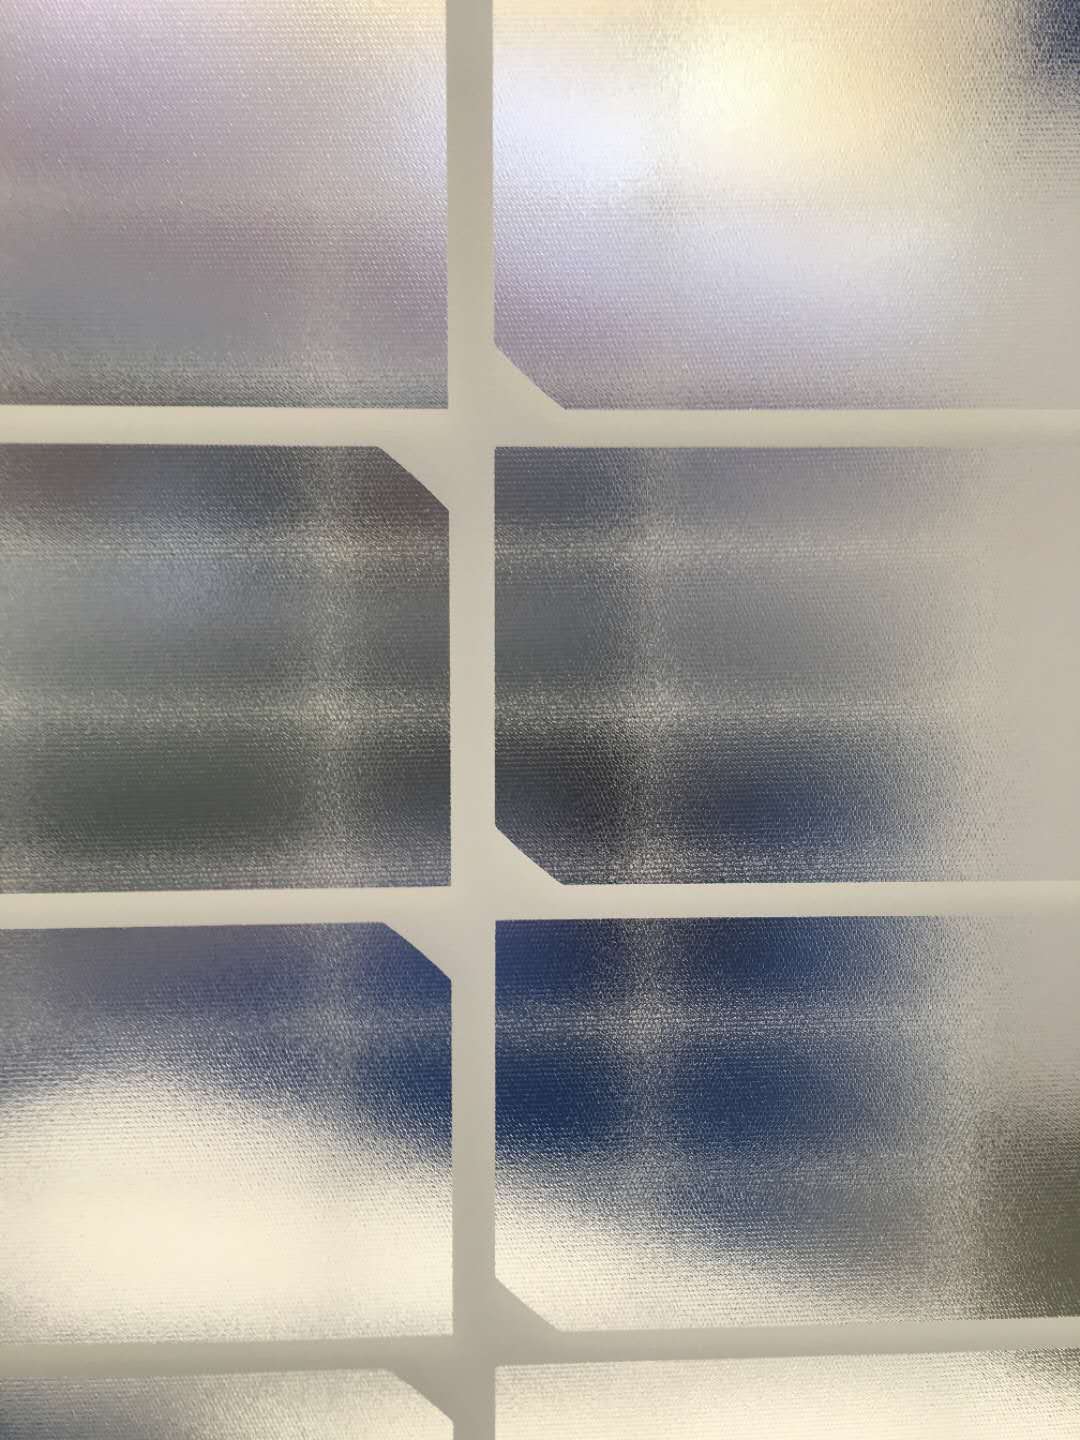 Application of the glass enamel on photovoltaic glass